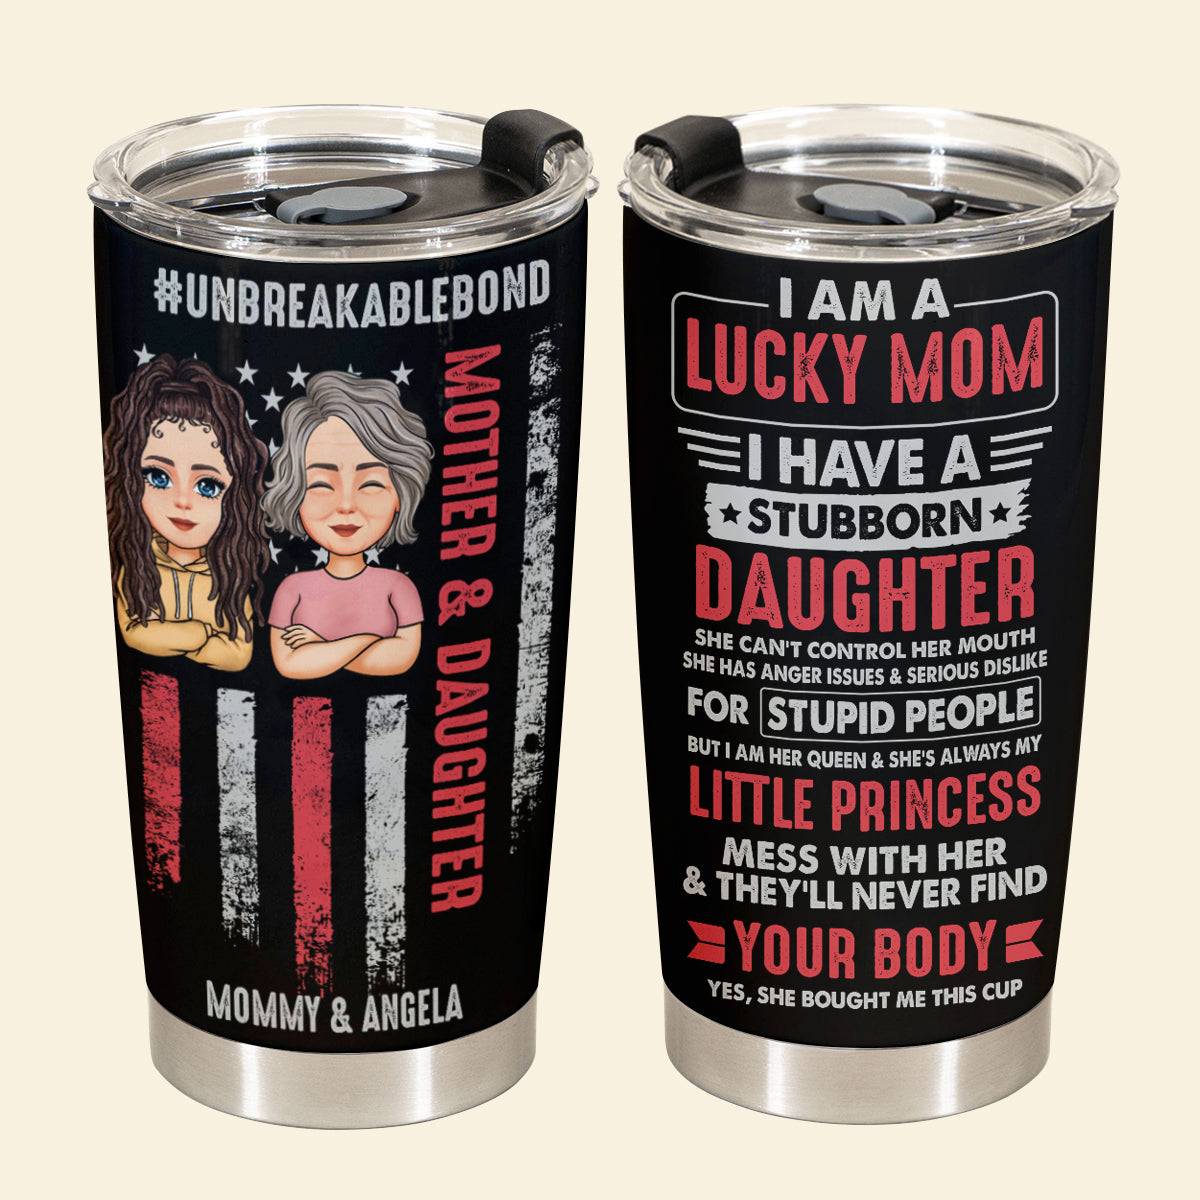 Unbreakablebond A Lucky Mom - Personalized Tumbler - Mother's Day, Loving, Birthday Gift For Mom, Mother, Mama